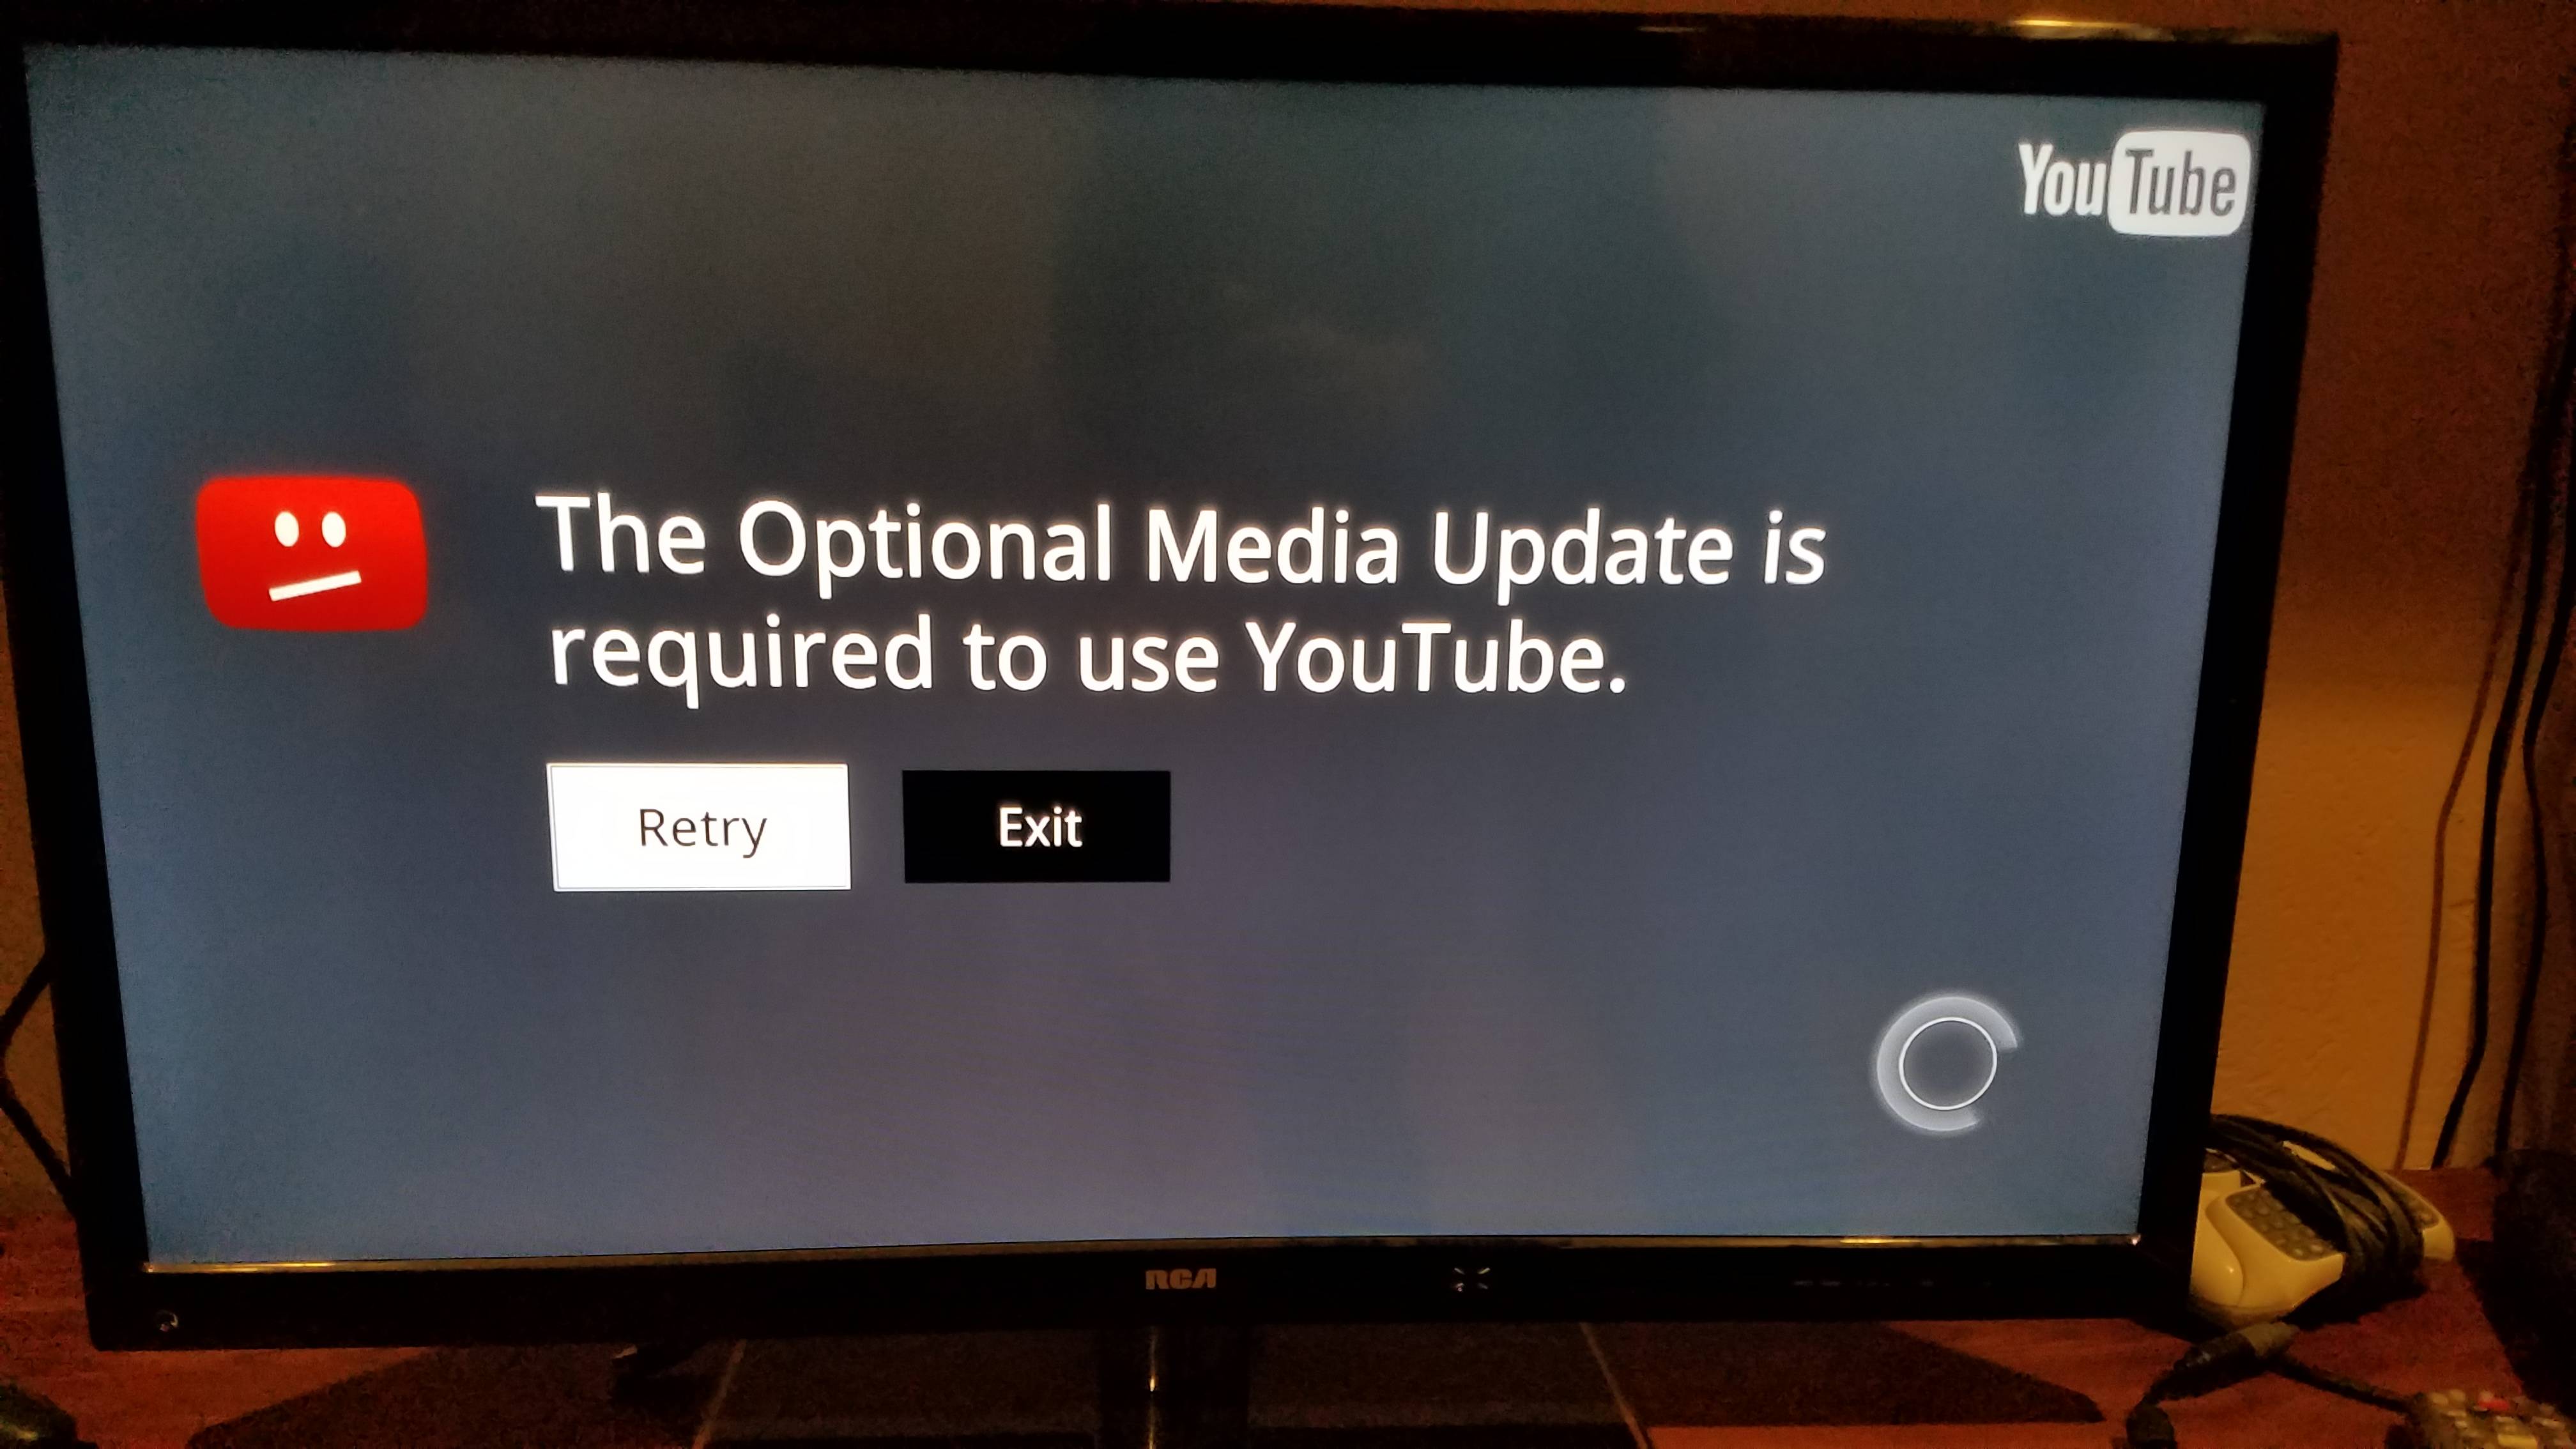 infuriating screen - YouTube The Optional Media Update is required to use YouTube. Retry Exit